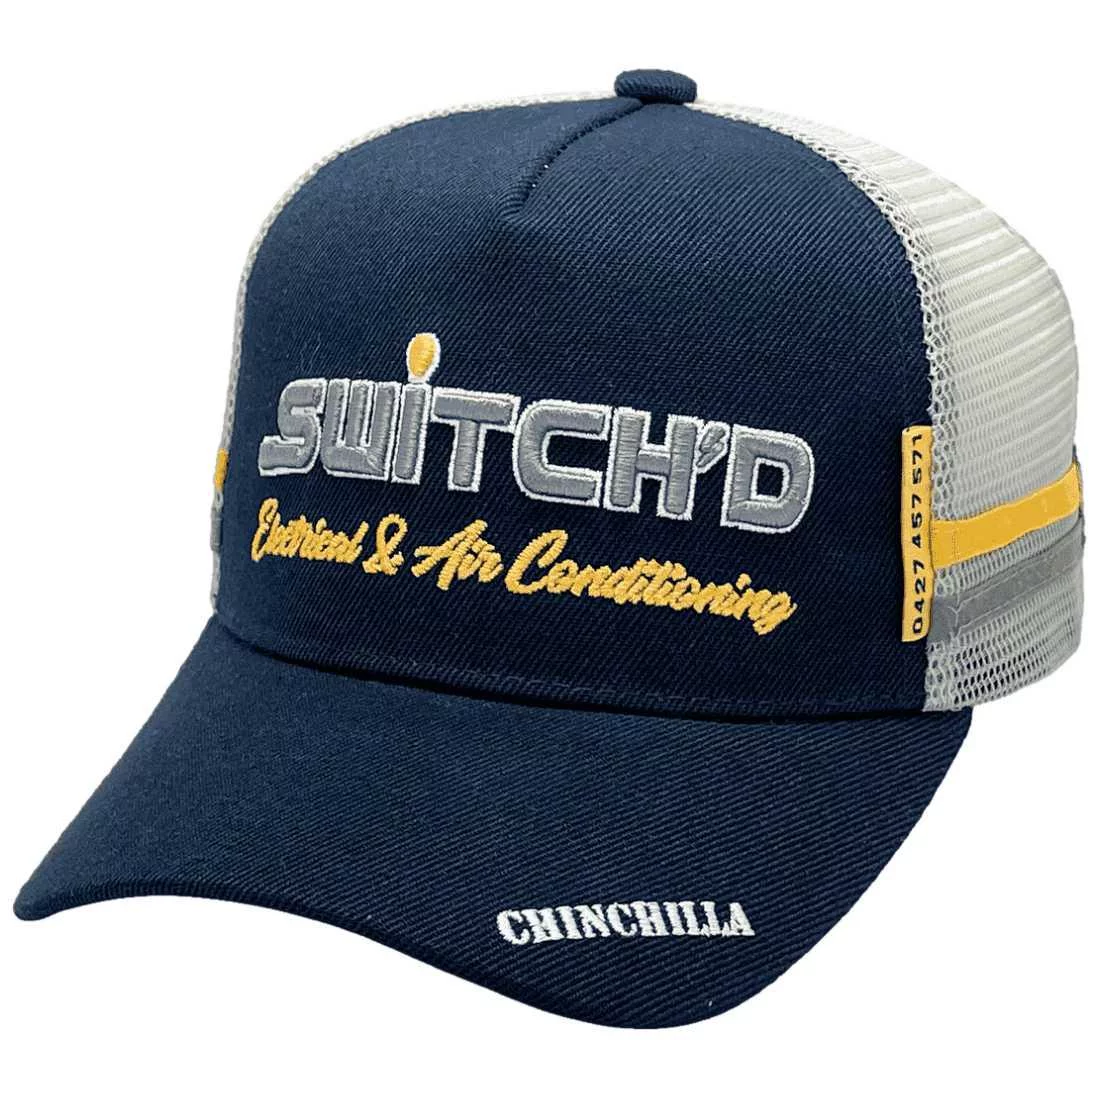 Switch'D Electrical & Air Conditioning Cairns Qld LP Original Midrange Aussie Trucker Hat with double side bands - Navy Gold Grey